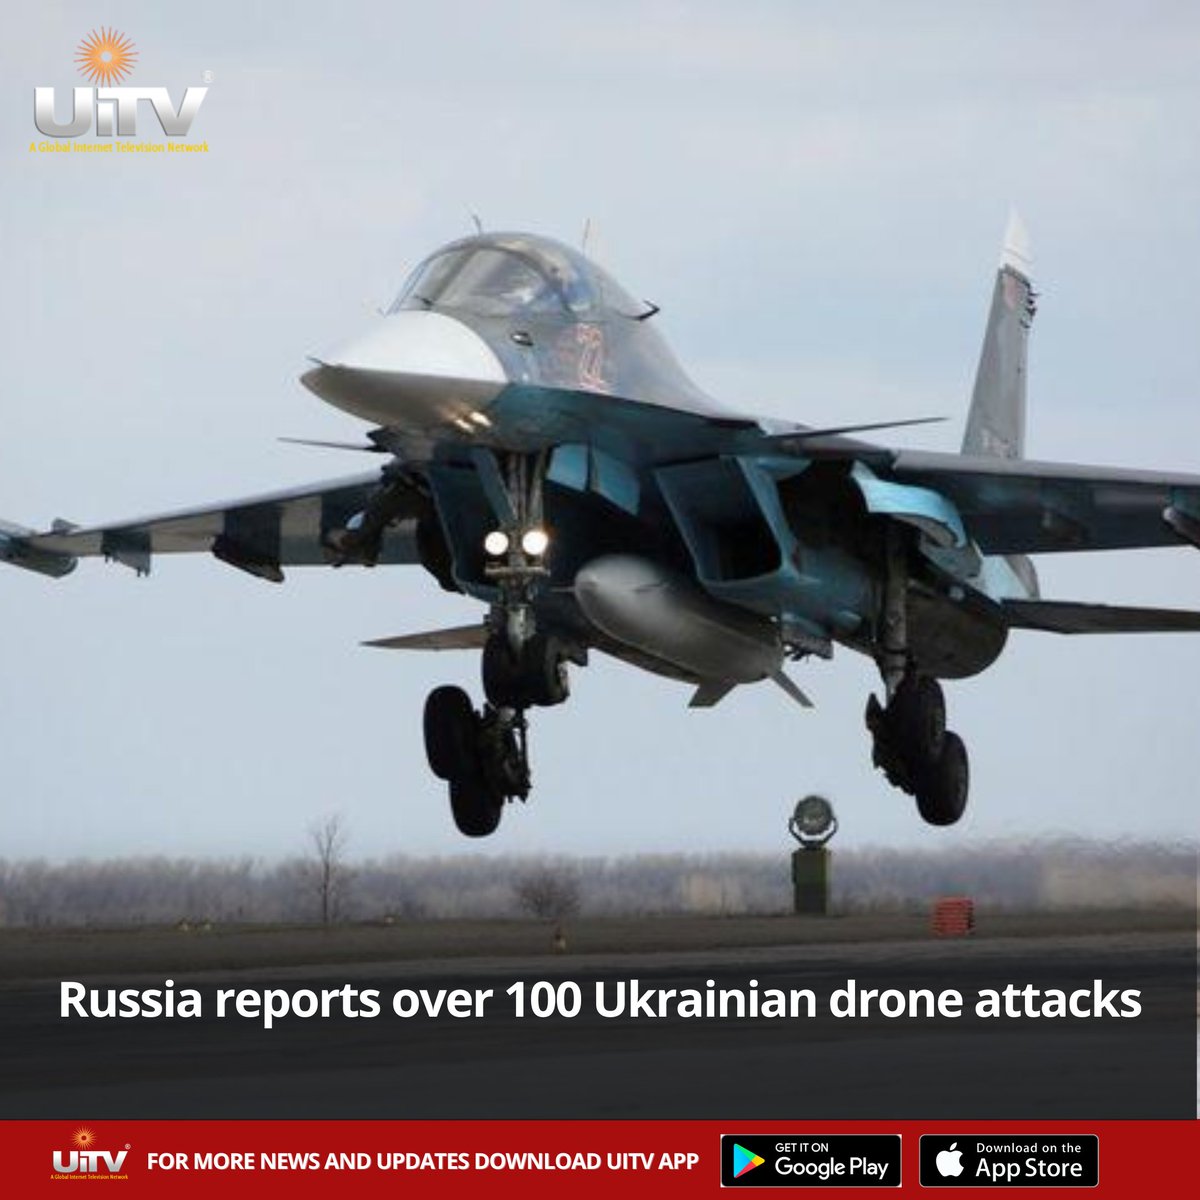 Reports indicate that Russia has experienced over 100 drone attacks from Ukrainian forces. The situation escalates tensions in the region, highlighting the ongoing conflict's severity. #Ukraine #Russia #Peace